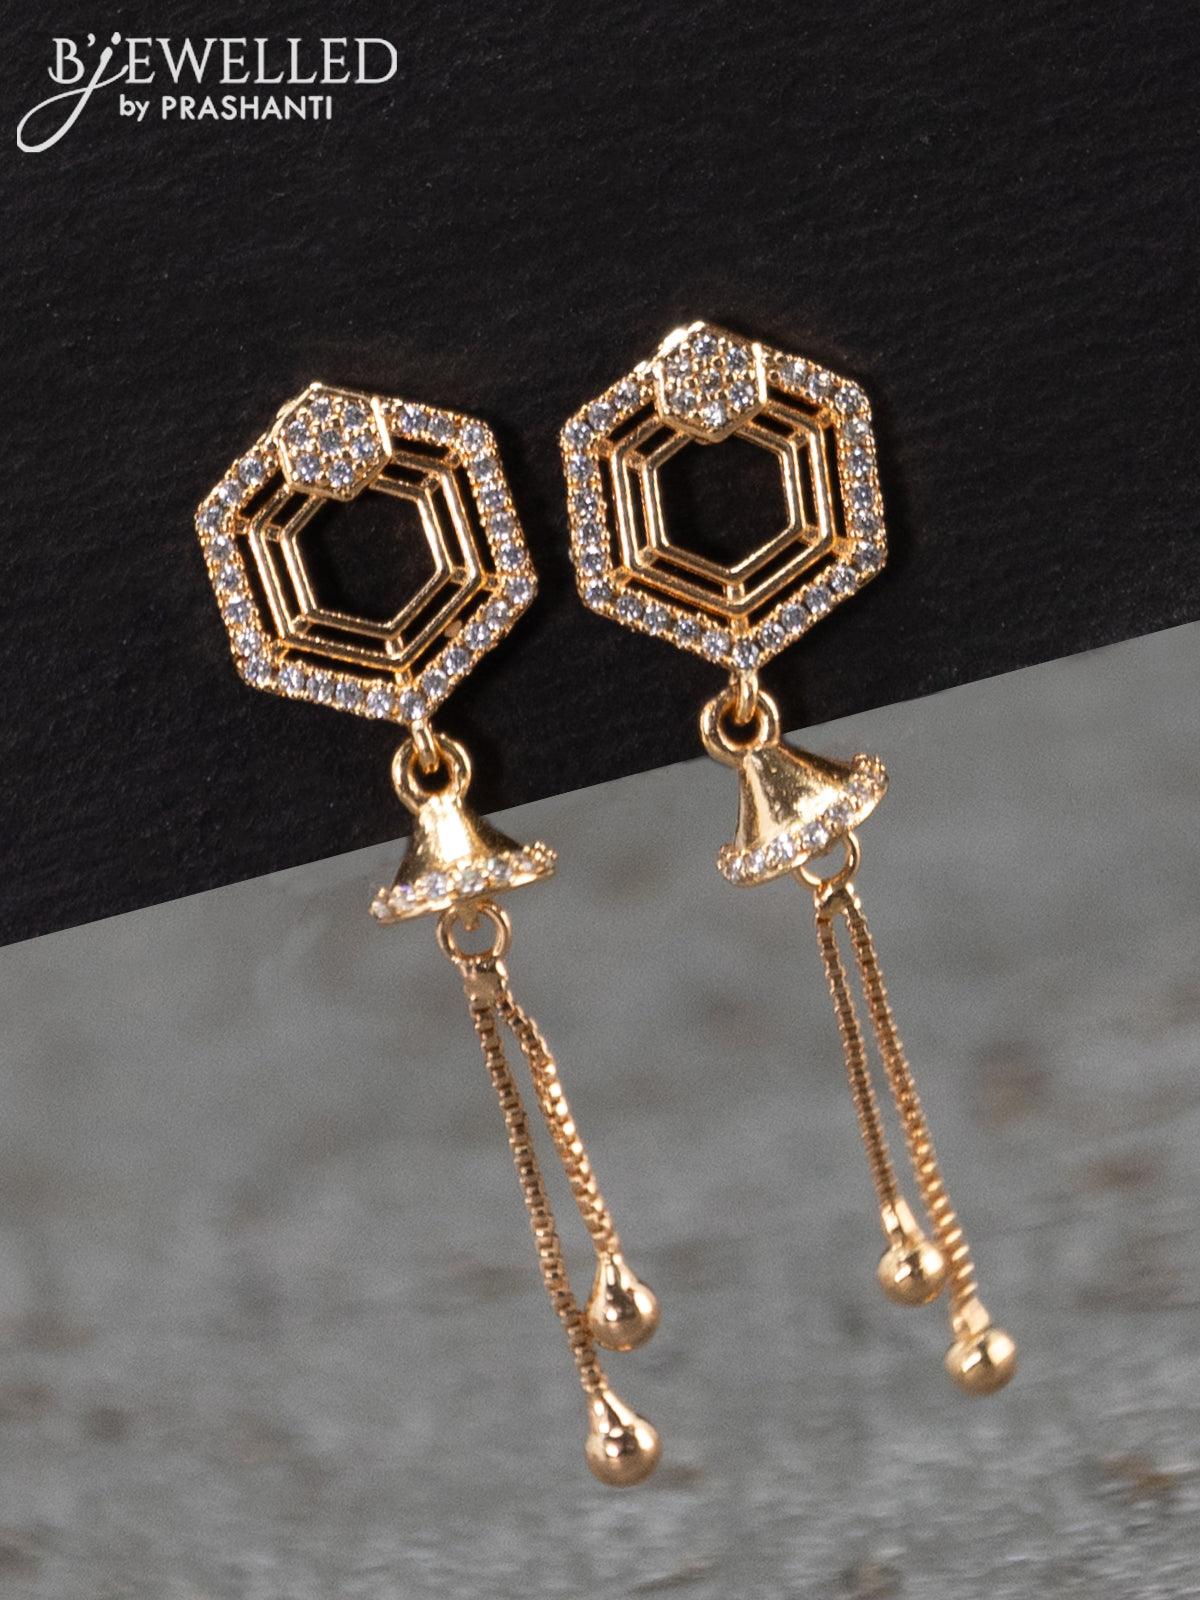 Top more than 186 gold earrings without hangings super hot